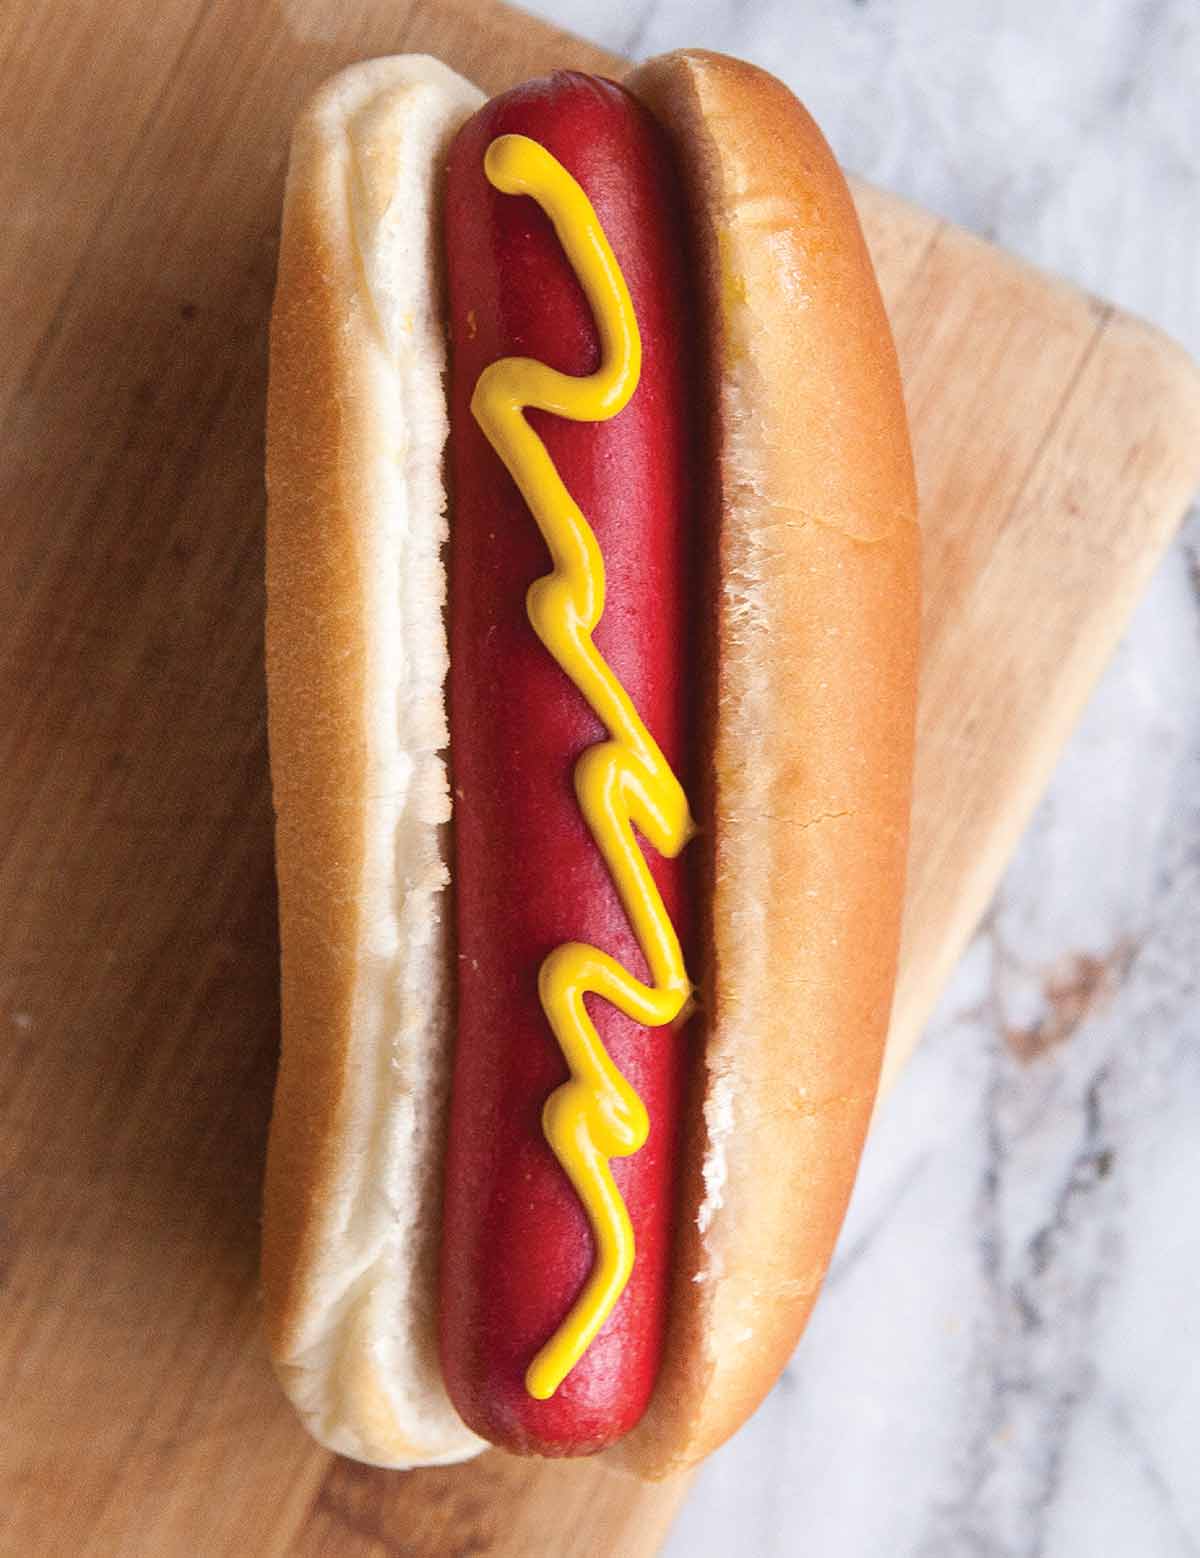 A hot dog on a bun with a squiggle of mustard.